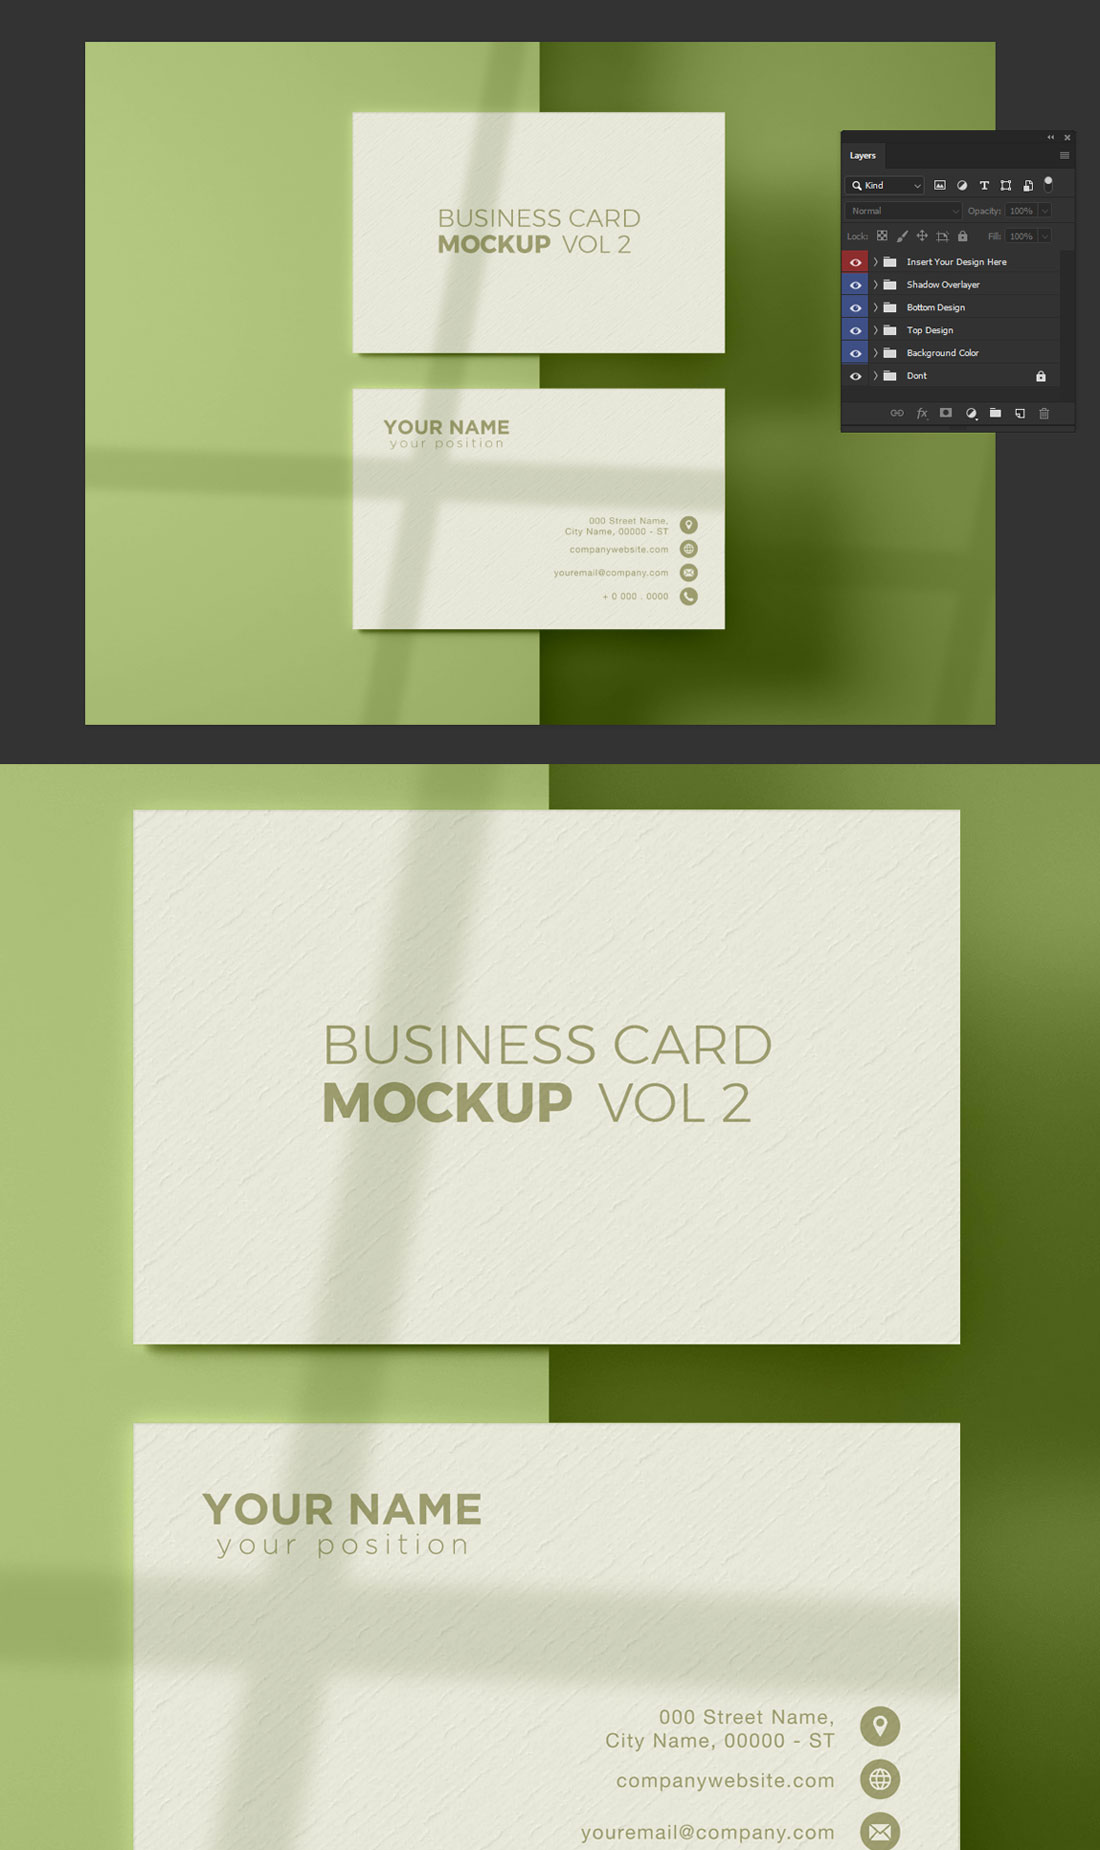 Shadow Overlayer Front and Back Business Card Mockup PSD 2019